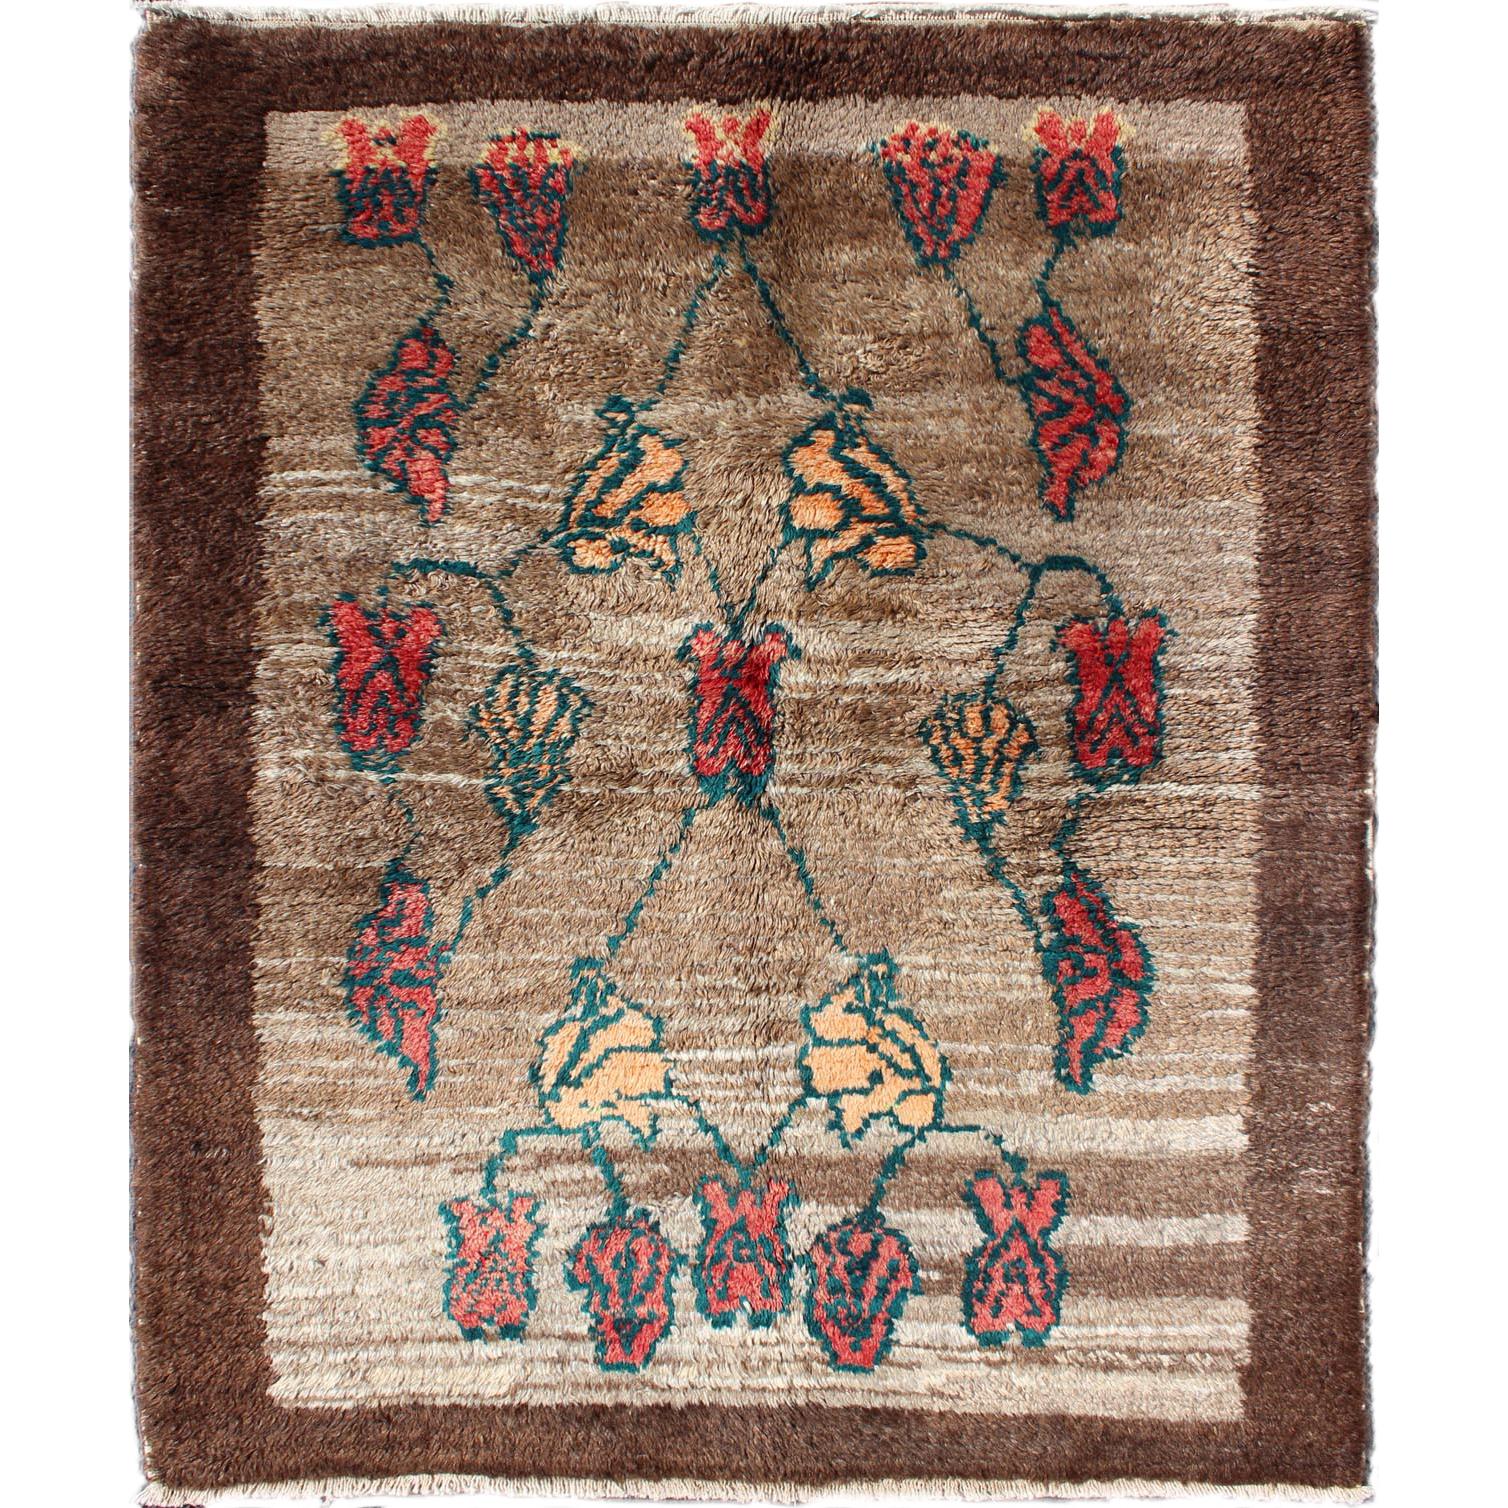 Vintage Tulu rug with Fine Wool in Camel Color Field & Brown Border